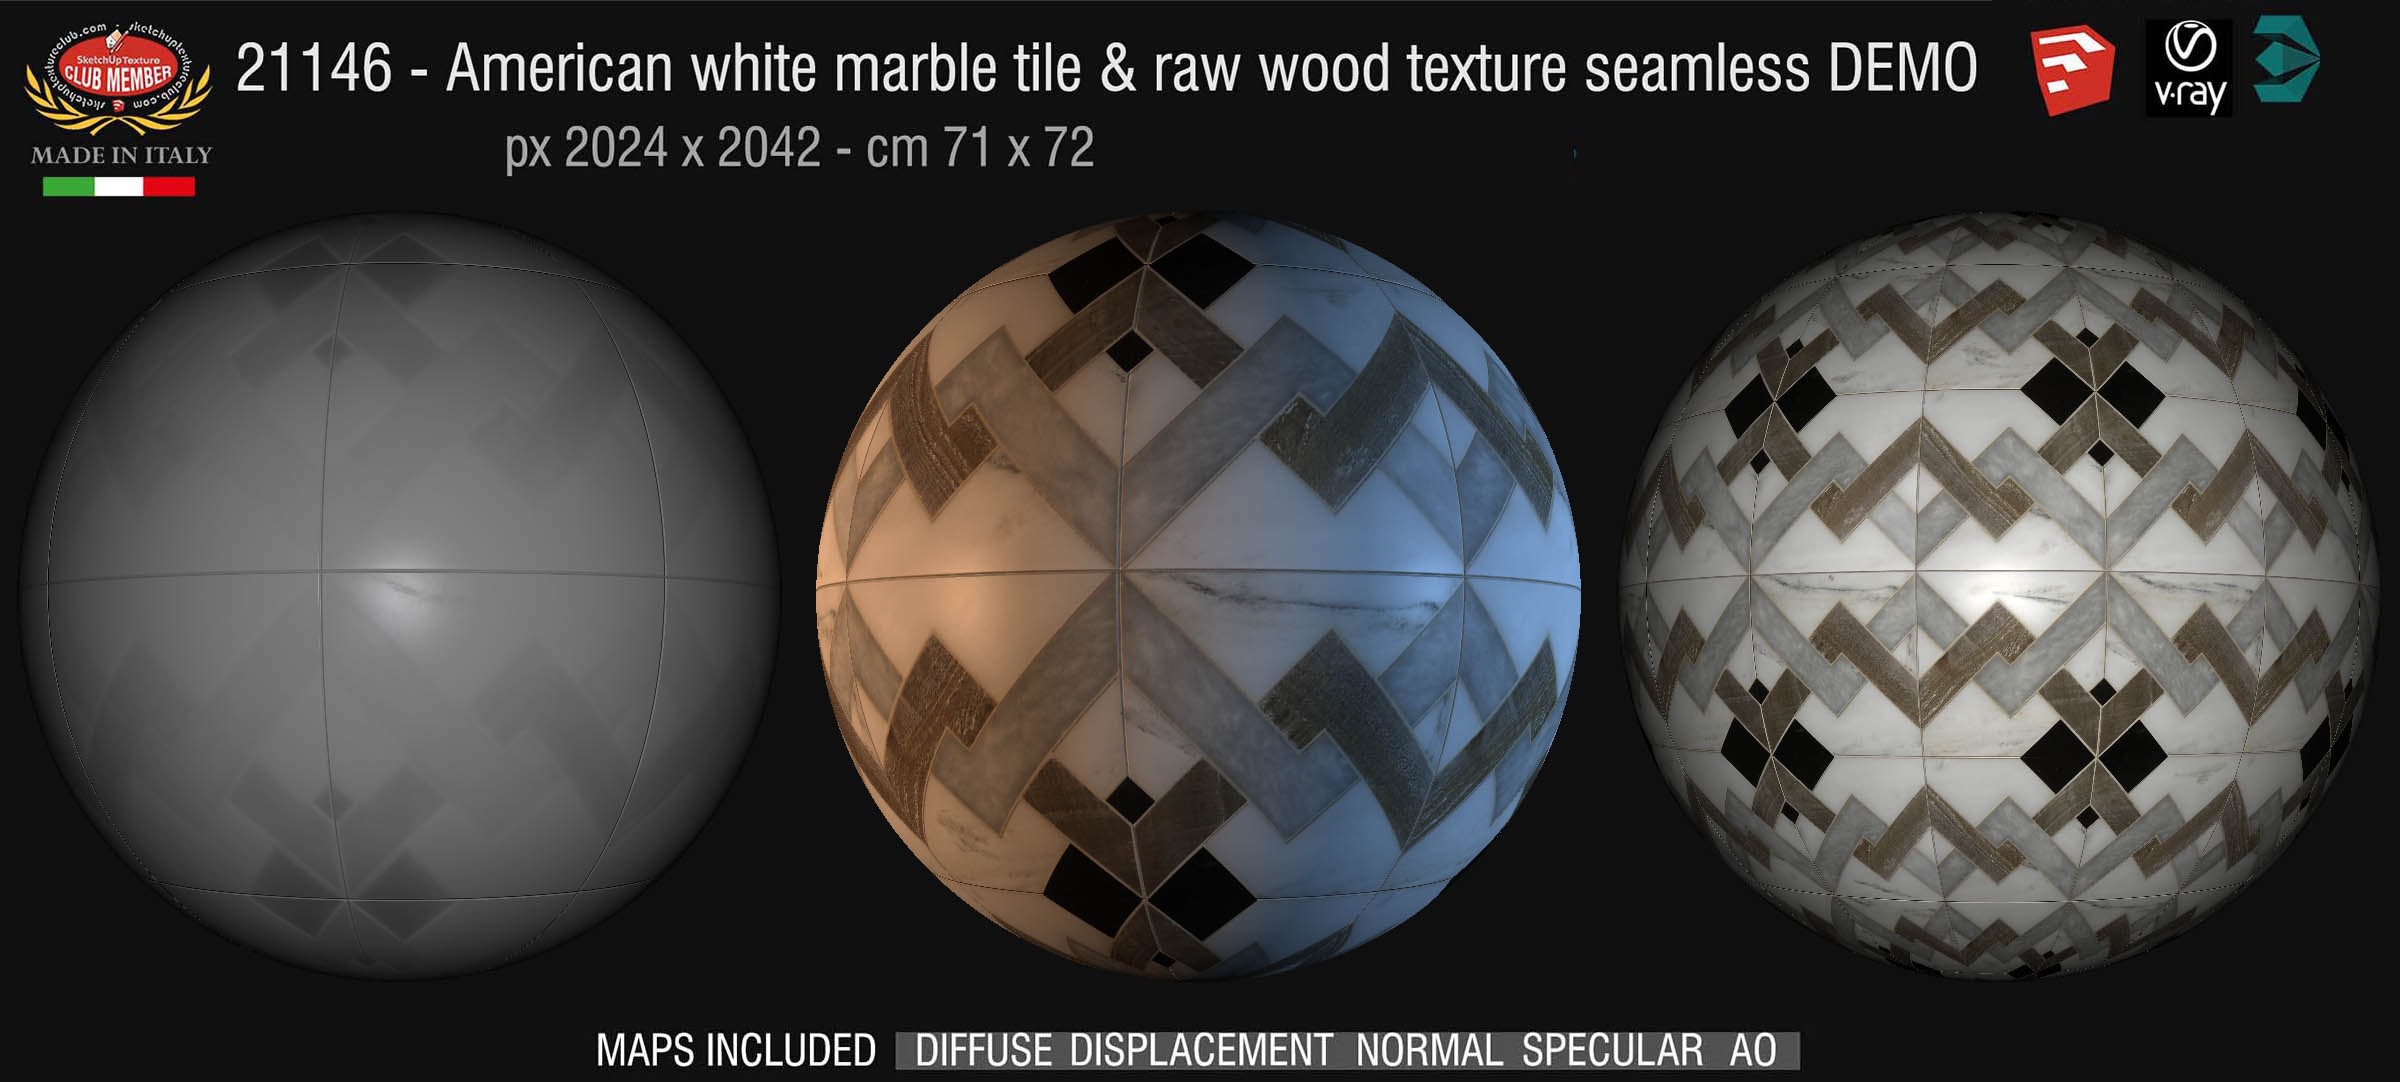 19816 American white marble tile whit raw wood texture seamless + maps DEMO